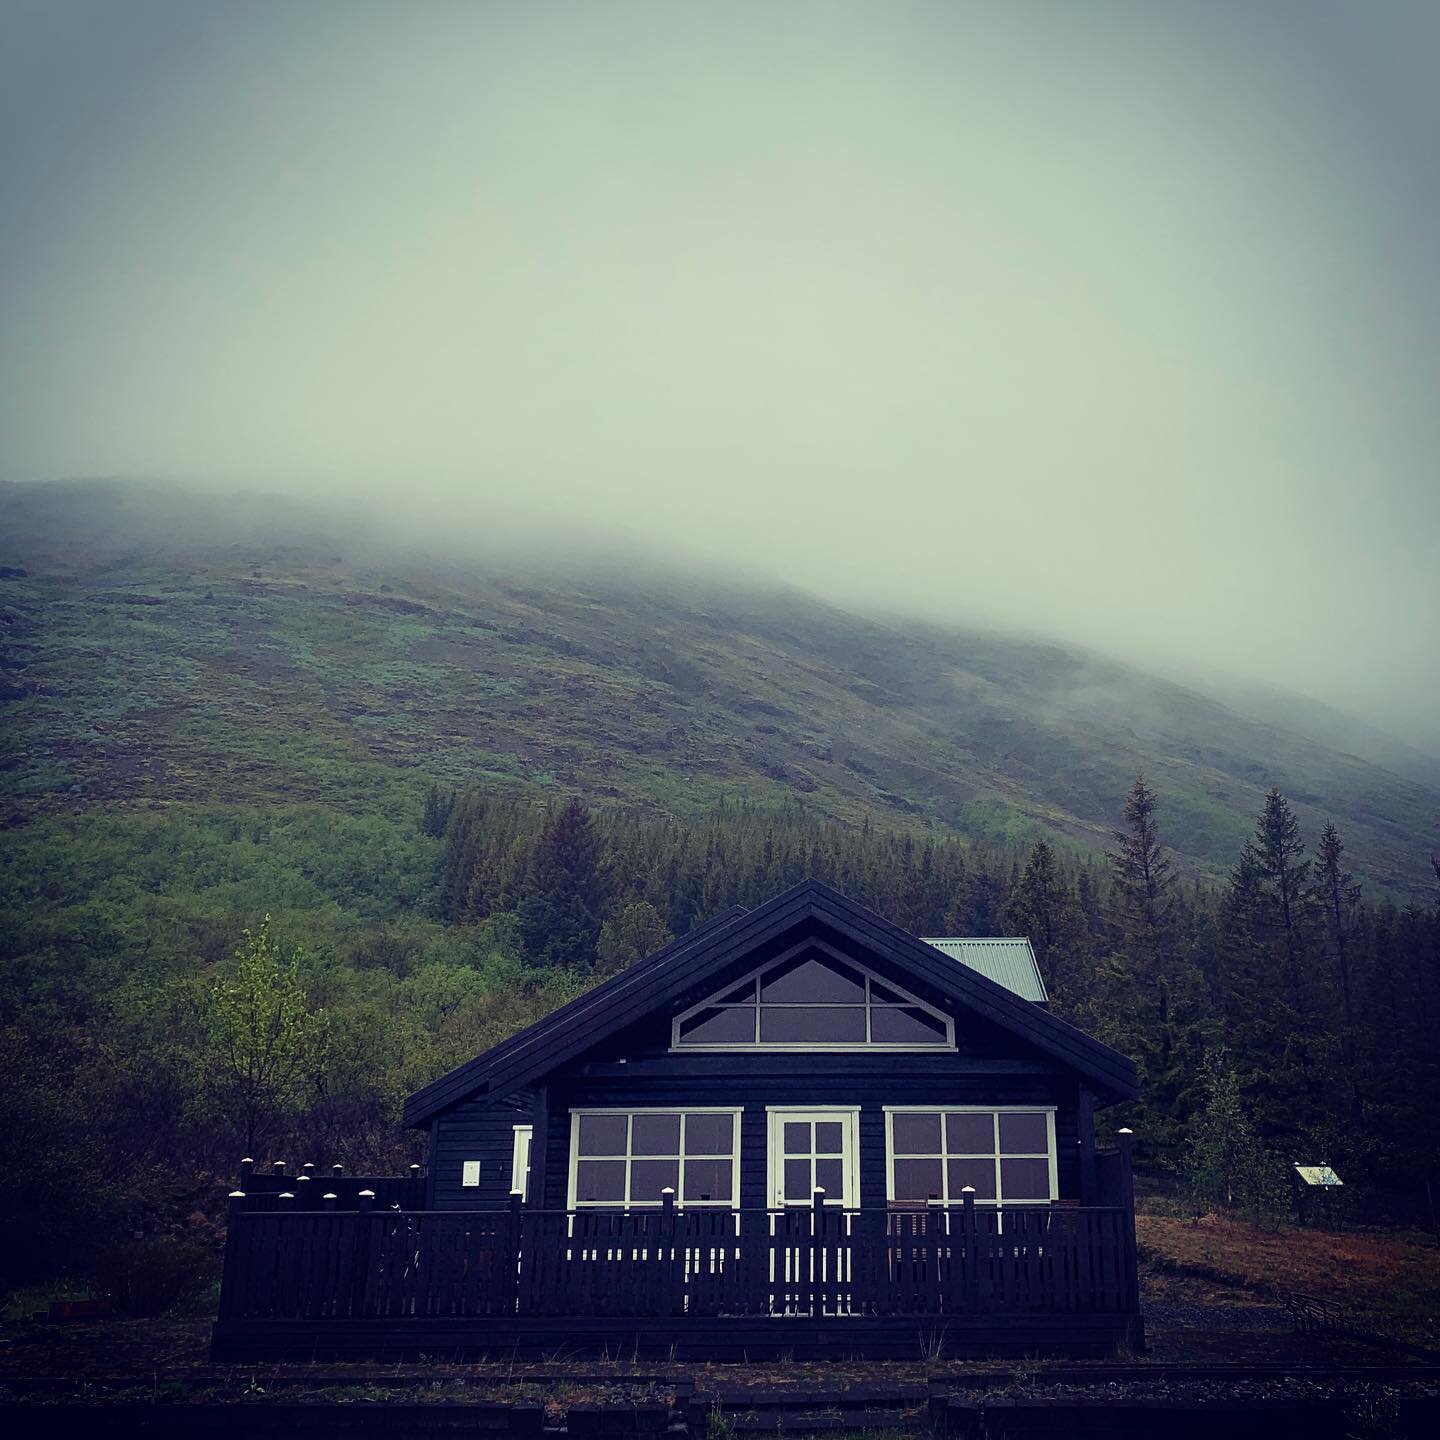 ..just spent a week in this beautiful cabin at the base of a mountain.. @gullkistan.is is an artist residency and center for creativity ♡ inspiring and so peaceful there I highly recommend making music and art here in Iceland &rarr; www.gullkistan.is